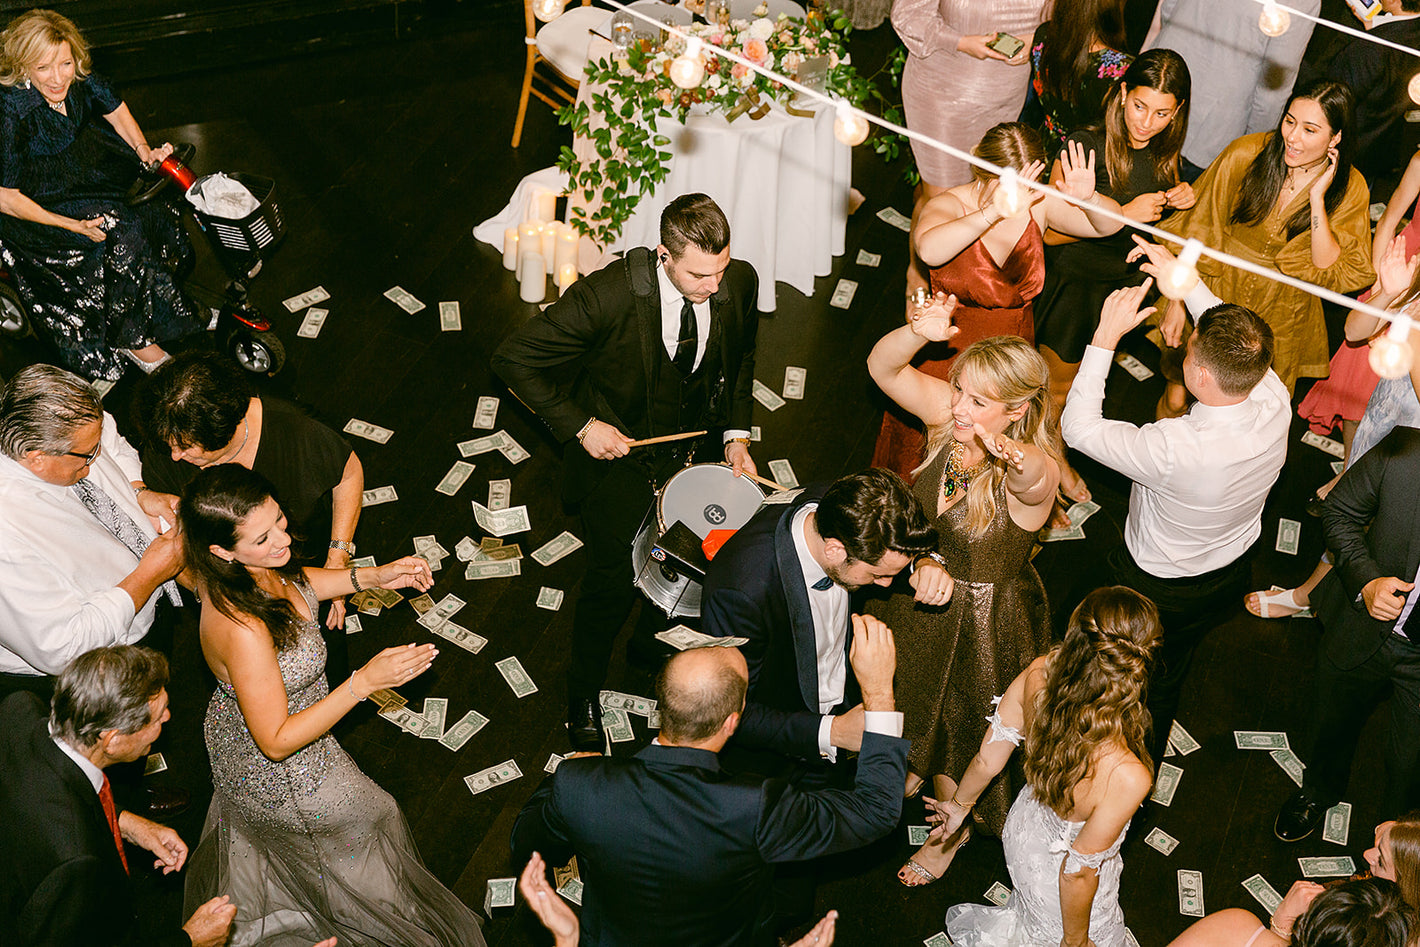 traditional greek money dance being performed at a Boston wedding venue